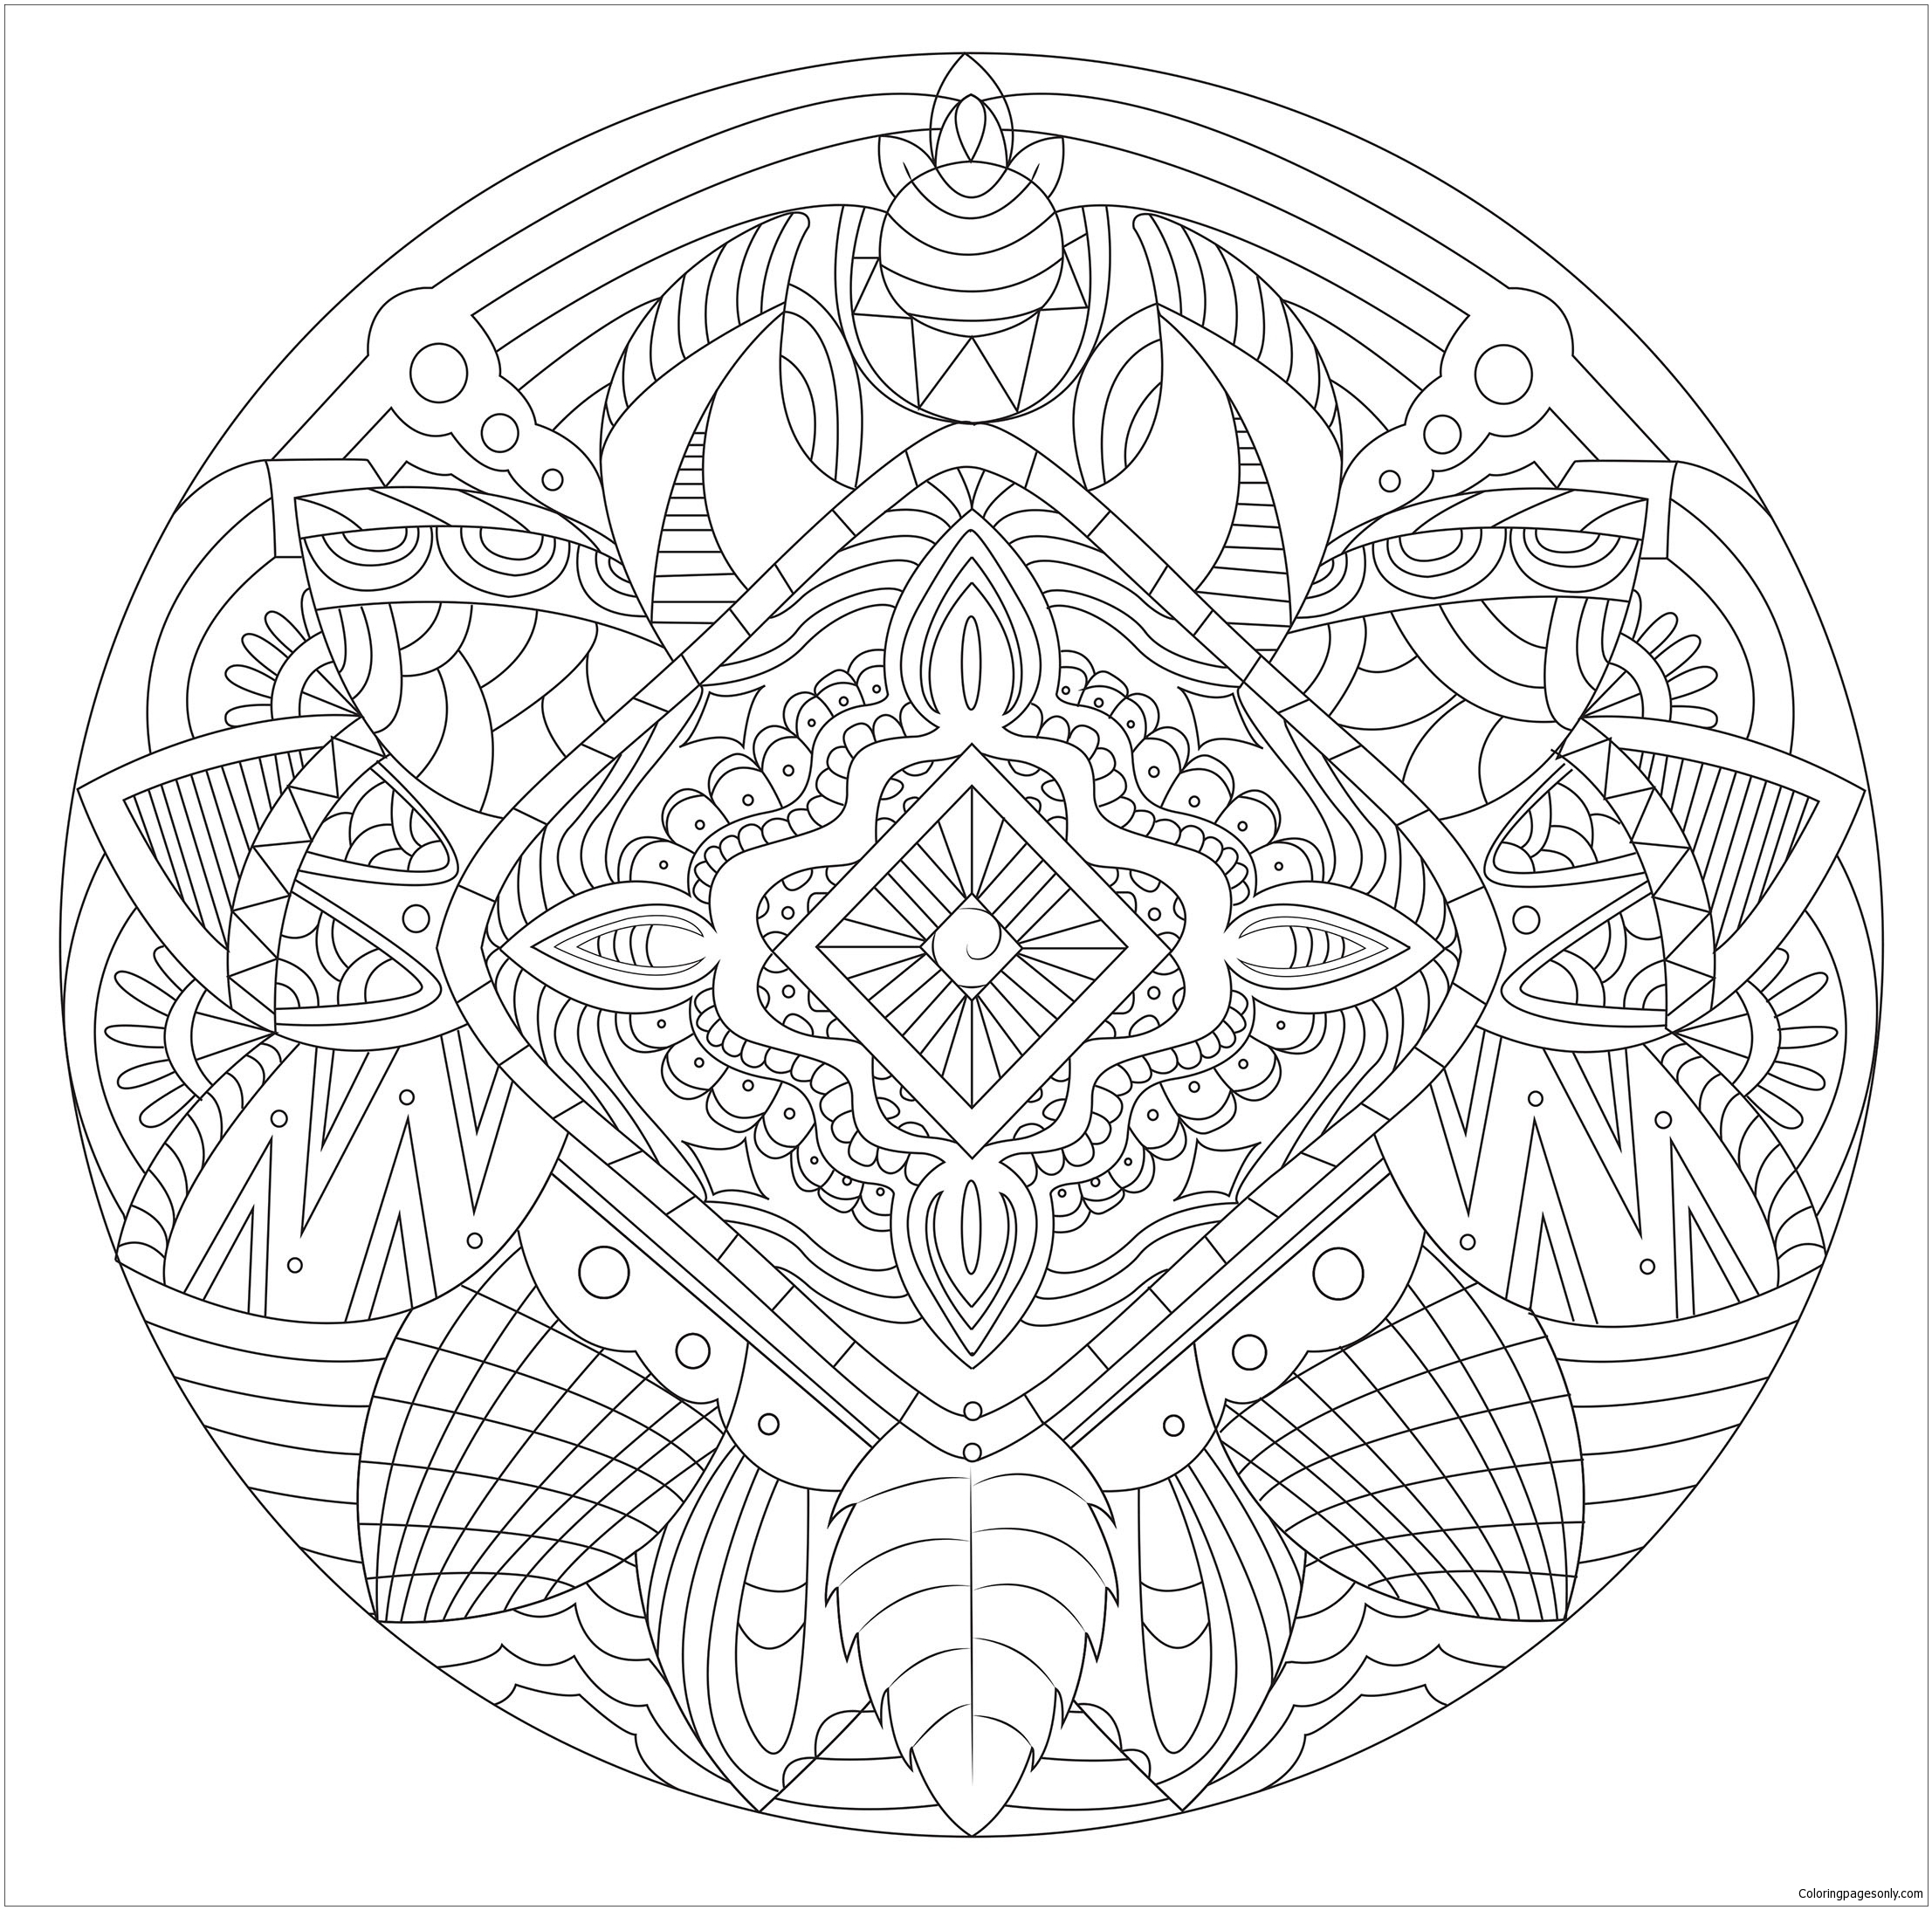 Mandala with Flowers and Feathers Coloring Pages